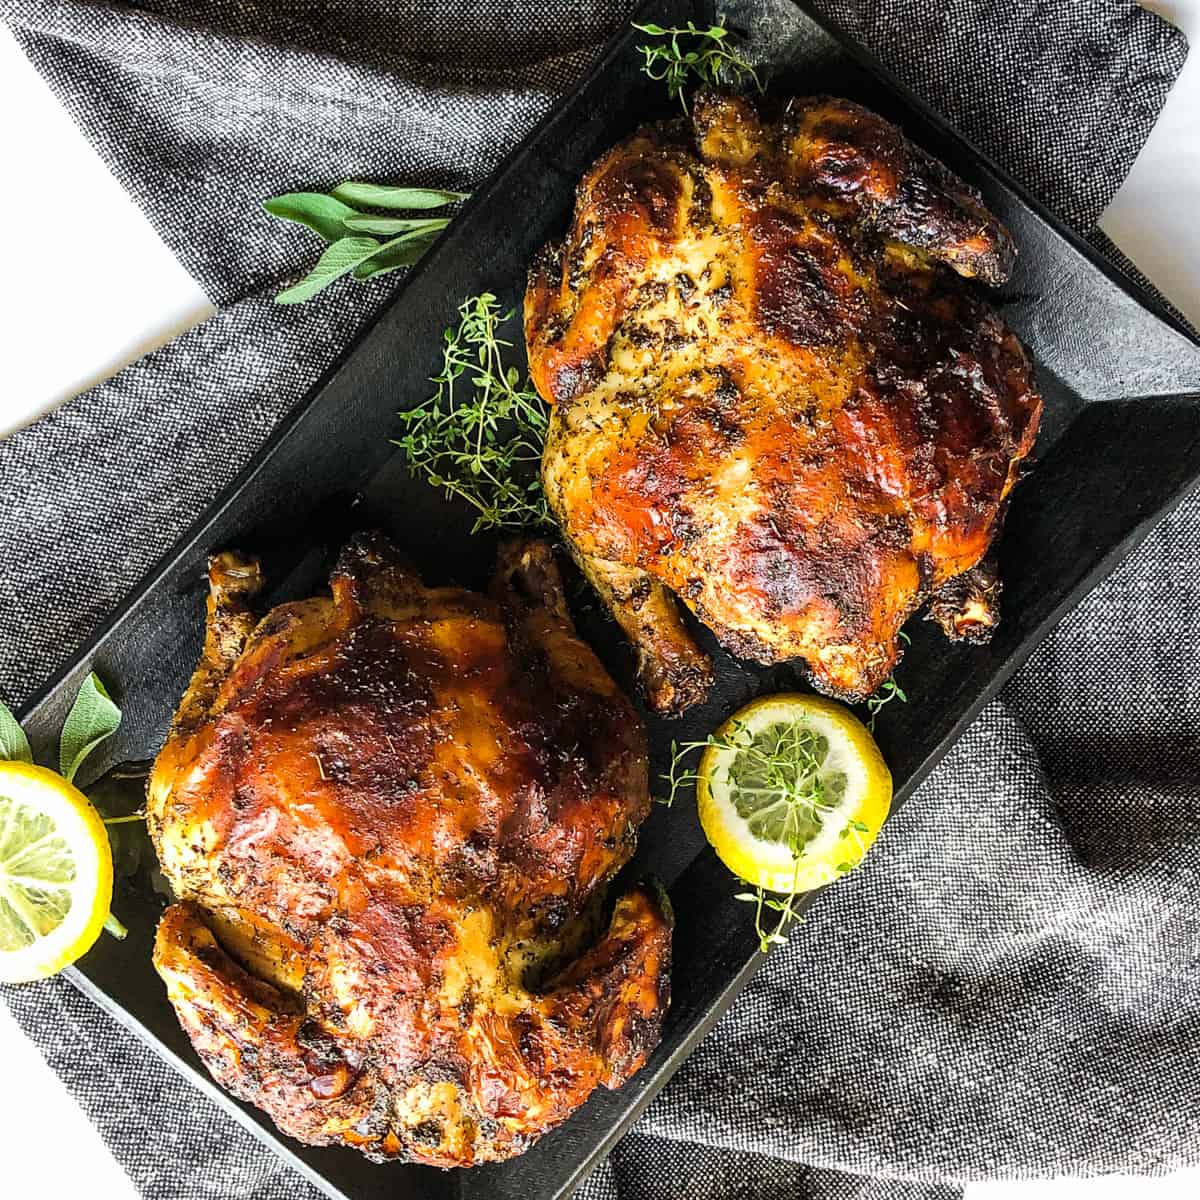 Overhead shot of two Cornish hens on a black platter.